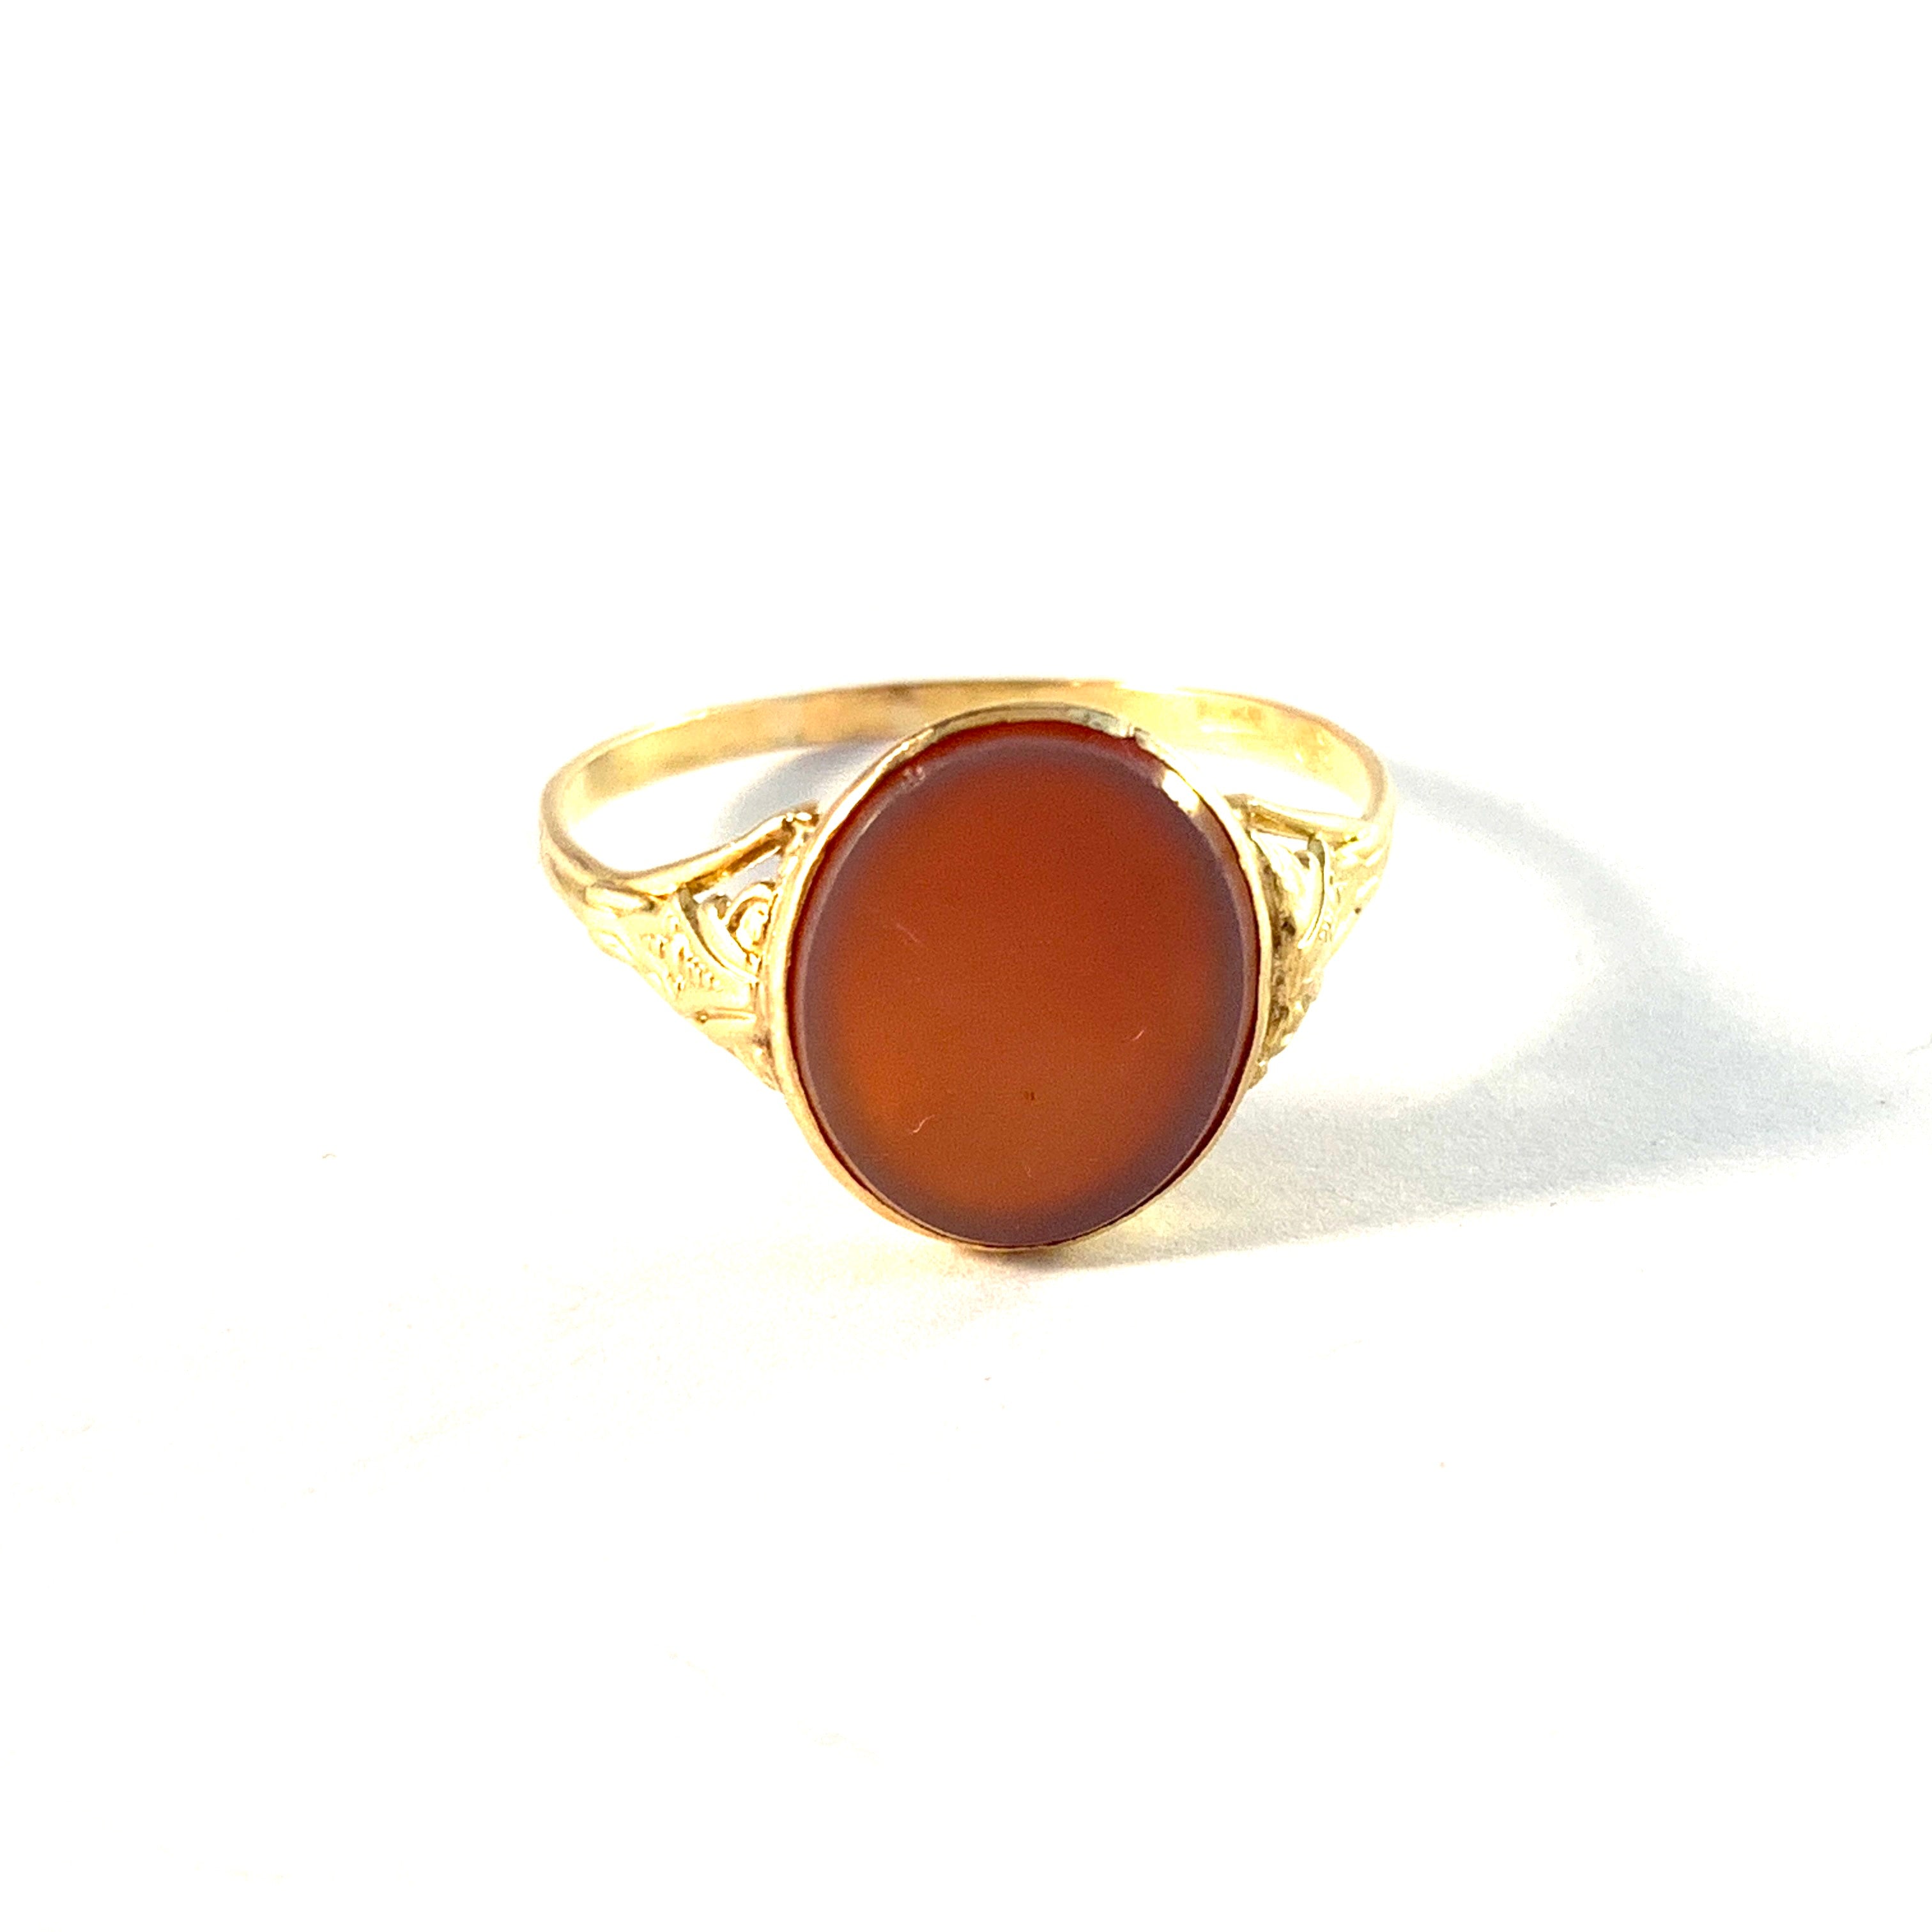 Early to mid 1900s. 18k Gold Carnelian Signet Ring.